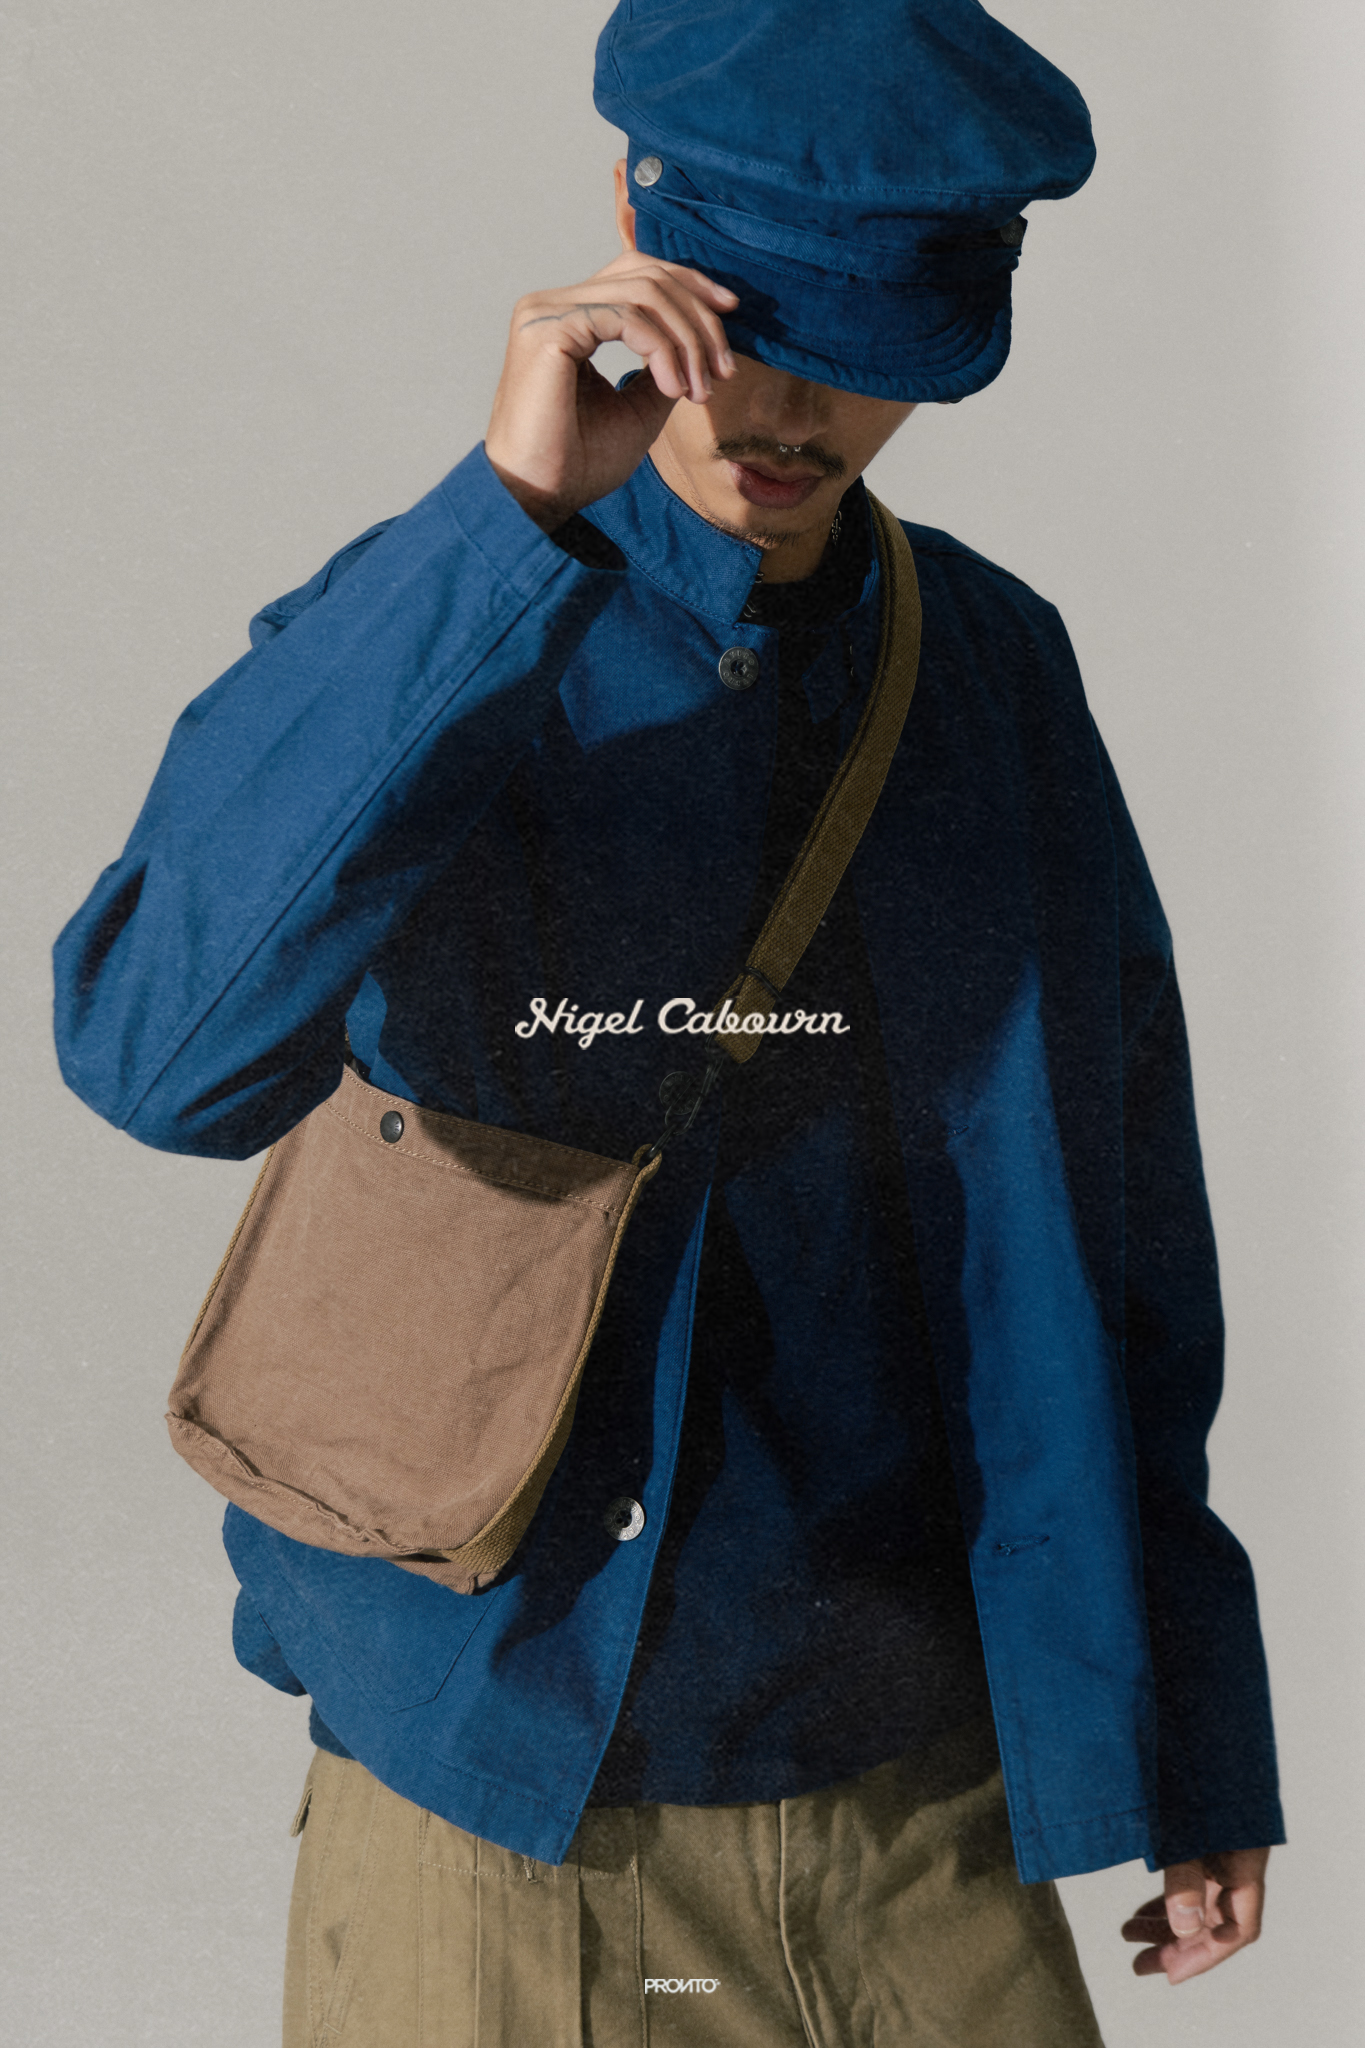 New Arrival : Nigel Cabourn